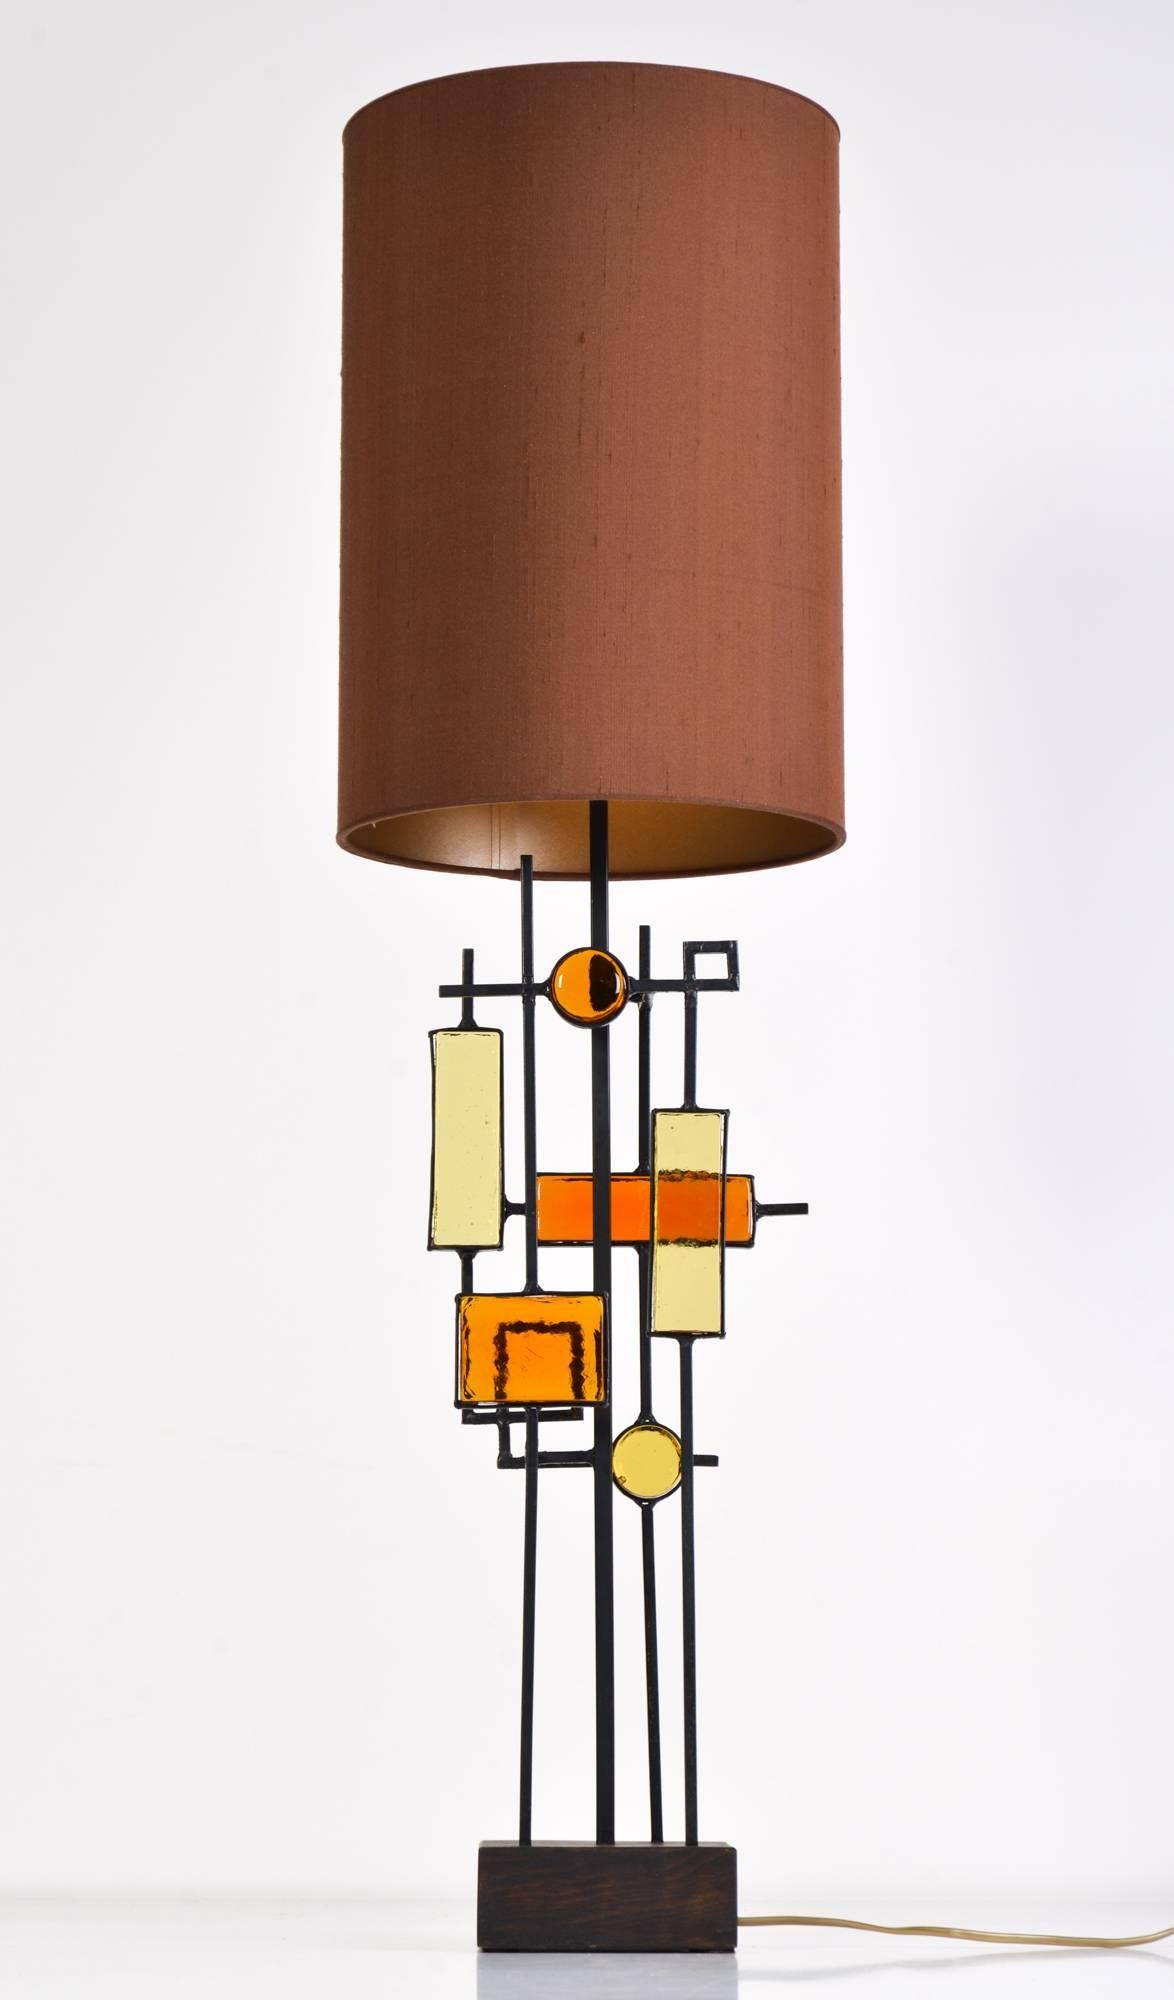 Beautiful authentic tall sculptural table lamp designed by Svend Aage Holm Sorensen for Holm Sorensen, Denmark, 1960. This Brutalist lamp has a fantastic sculptural base of a black lacquered wooden foot, ebonized abstract metal structures mounted